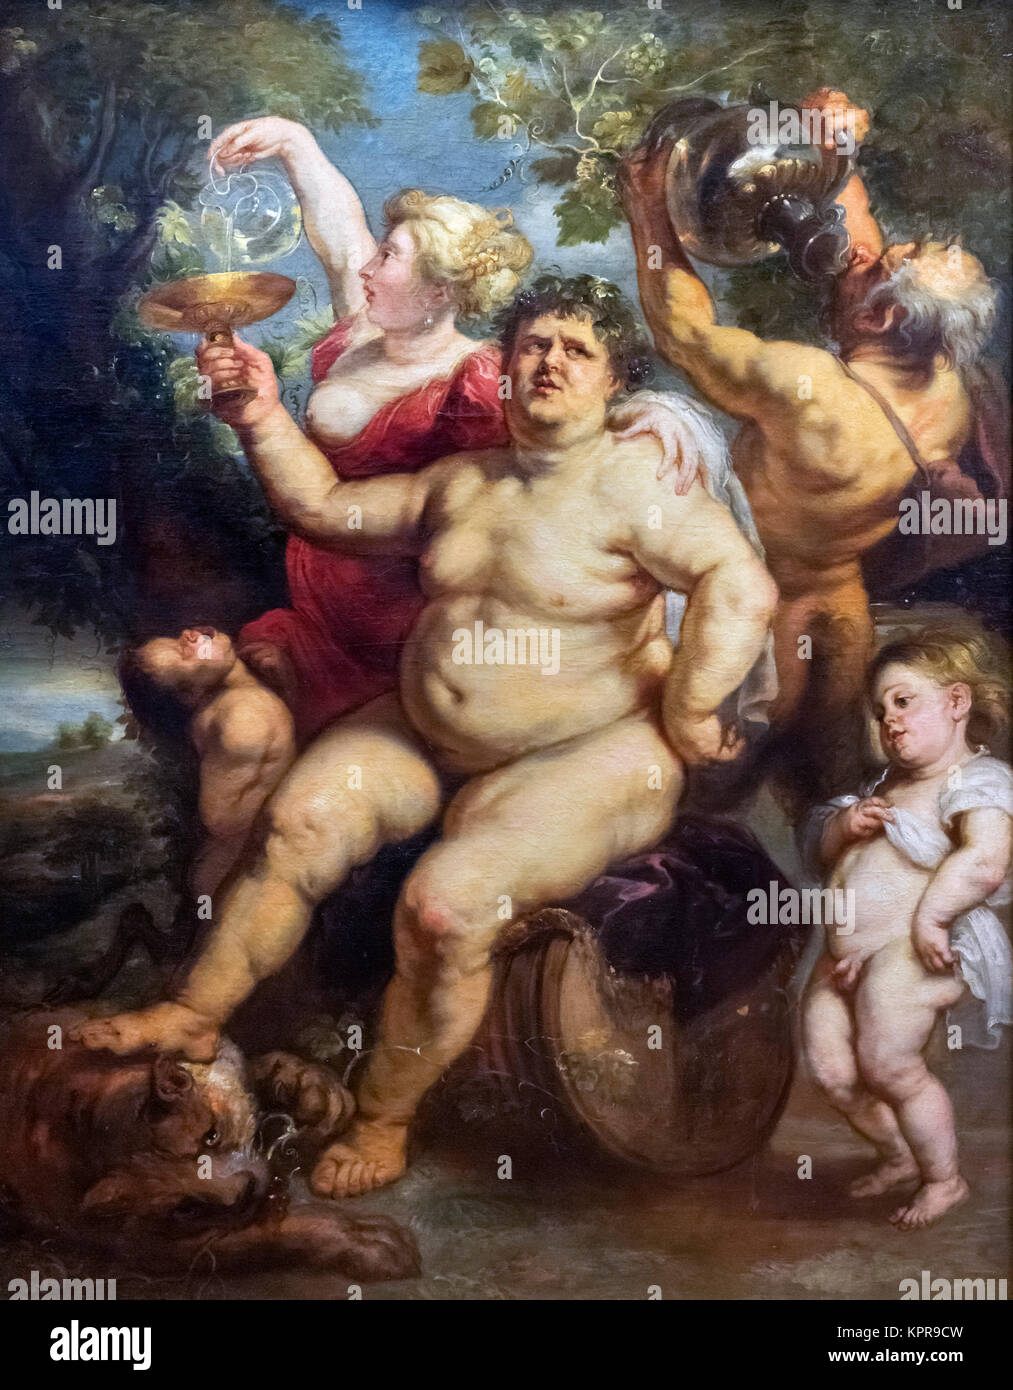 Bacchanalia by Peter Paul Rubens (1577-1640), oil on canvas, c.1635-40. The painting depicts Bacchus (or Dionysus), the God of Wine. Stock Photo